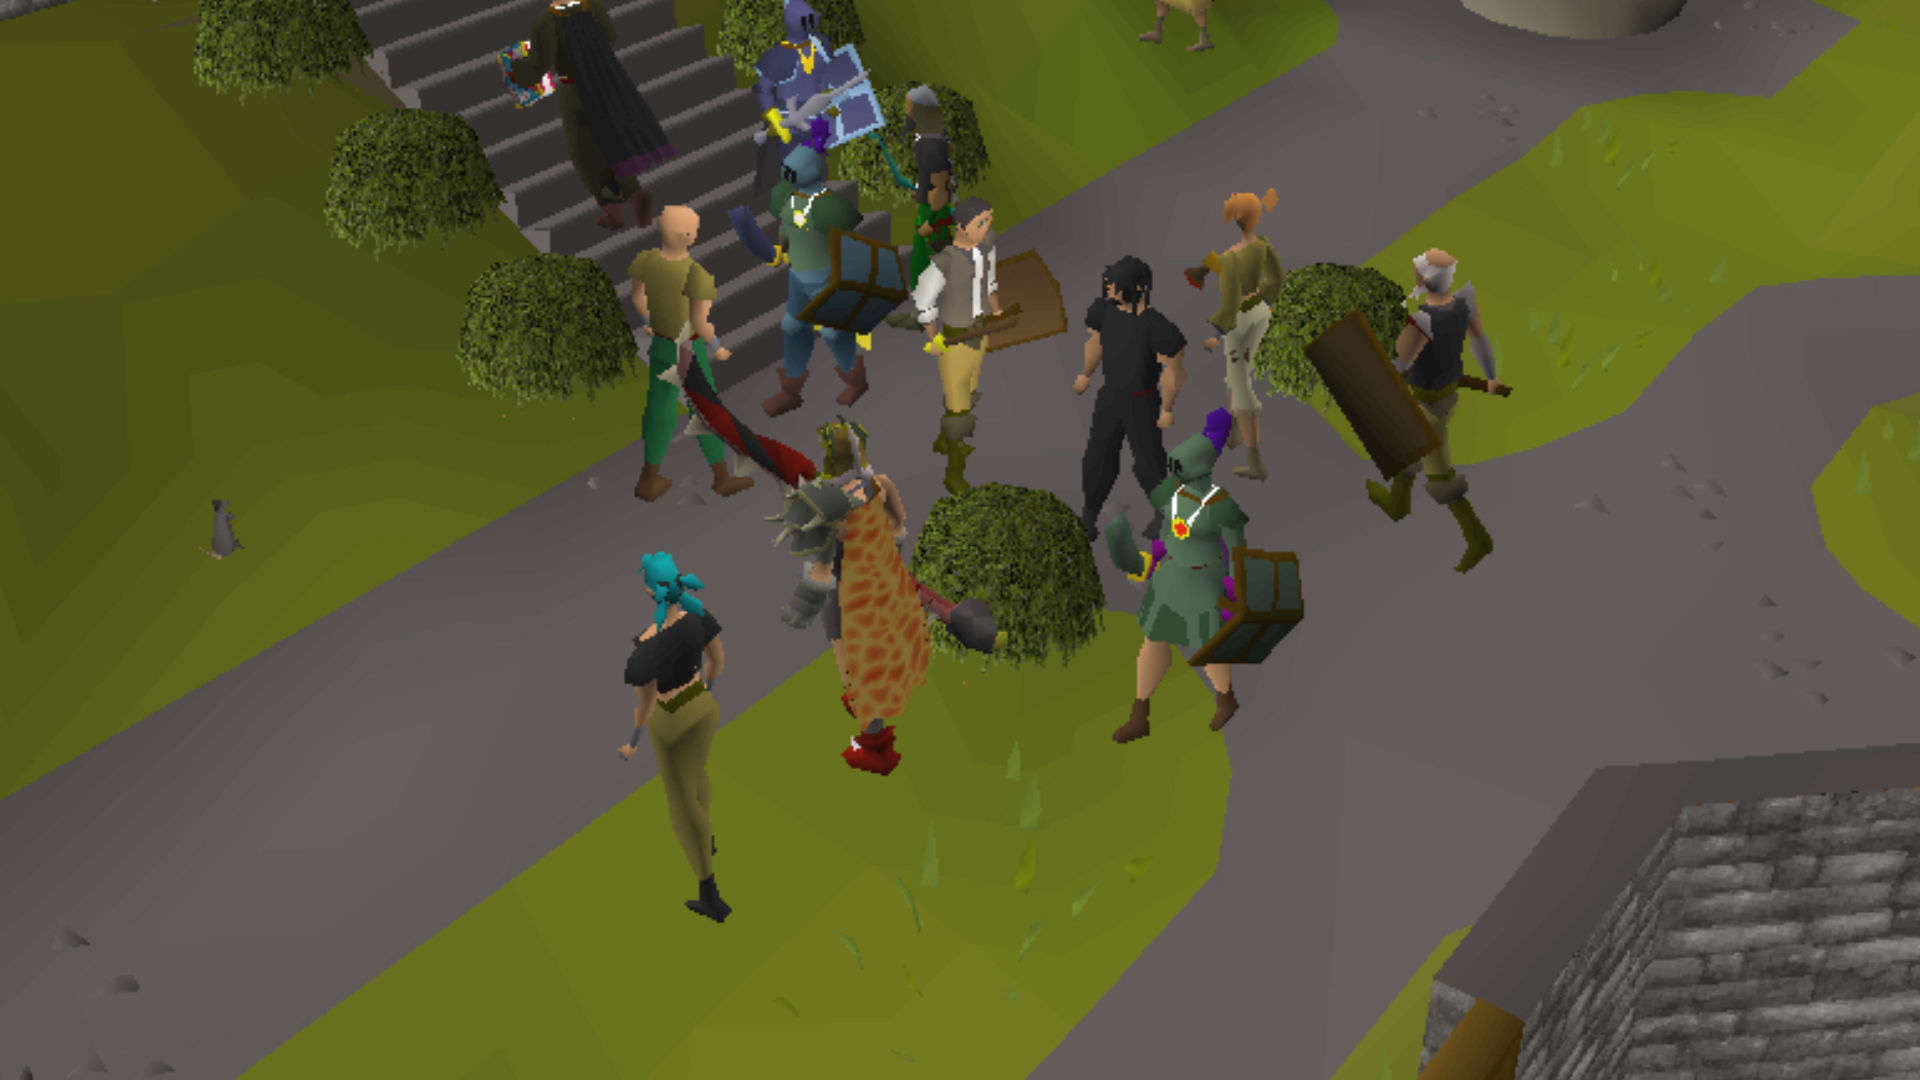 Best iOS games: Old School RuneScape. Image shows a group of people walking around outside.